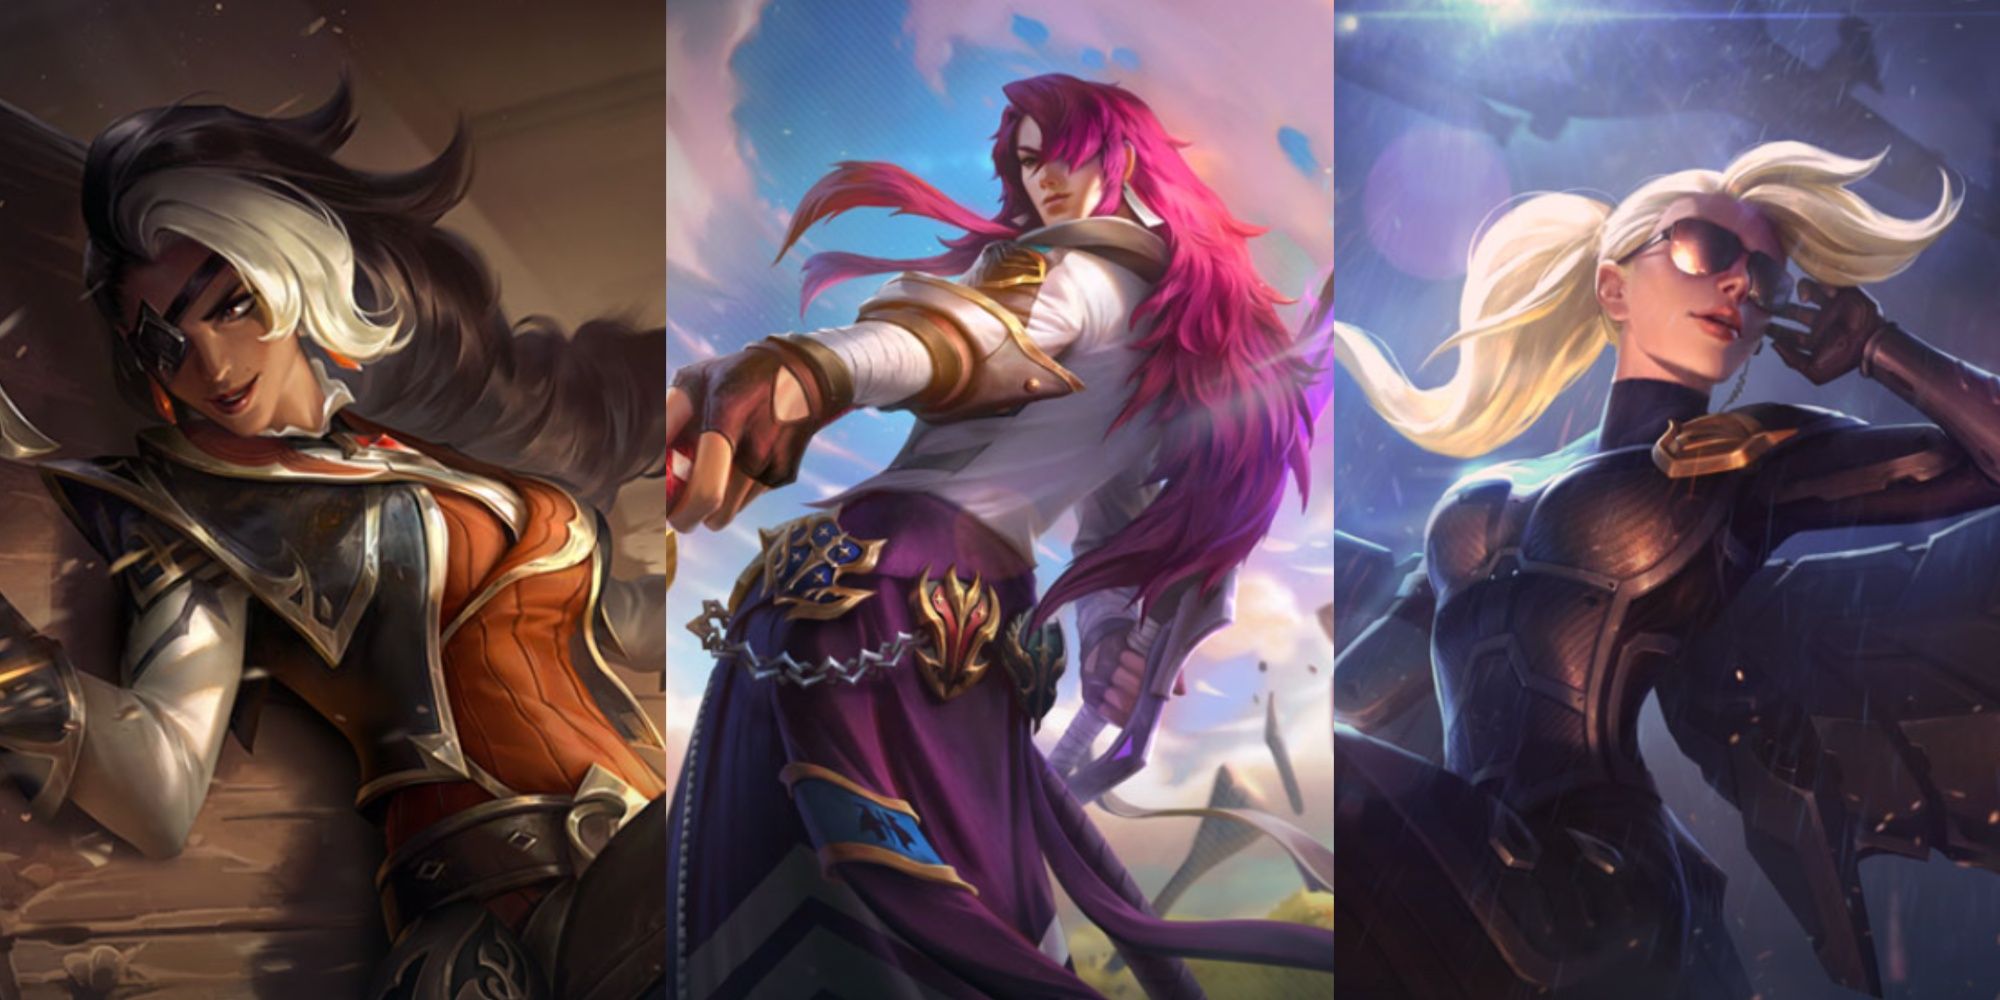 A collage of High Noon Samira, Battle Academia Yone, and Riot Kayle in League Of Legends.